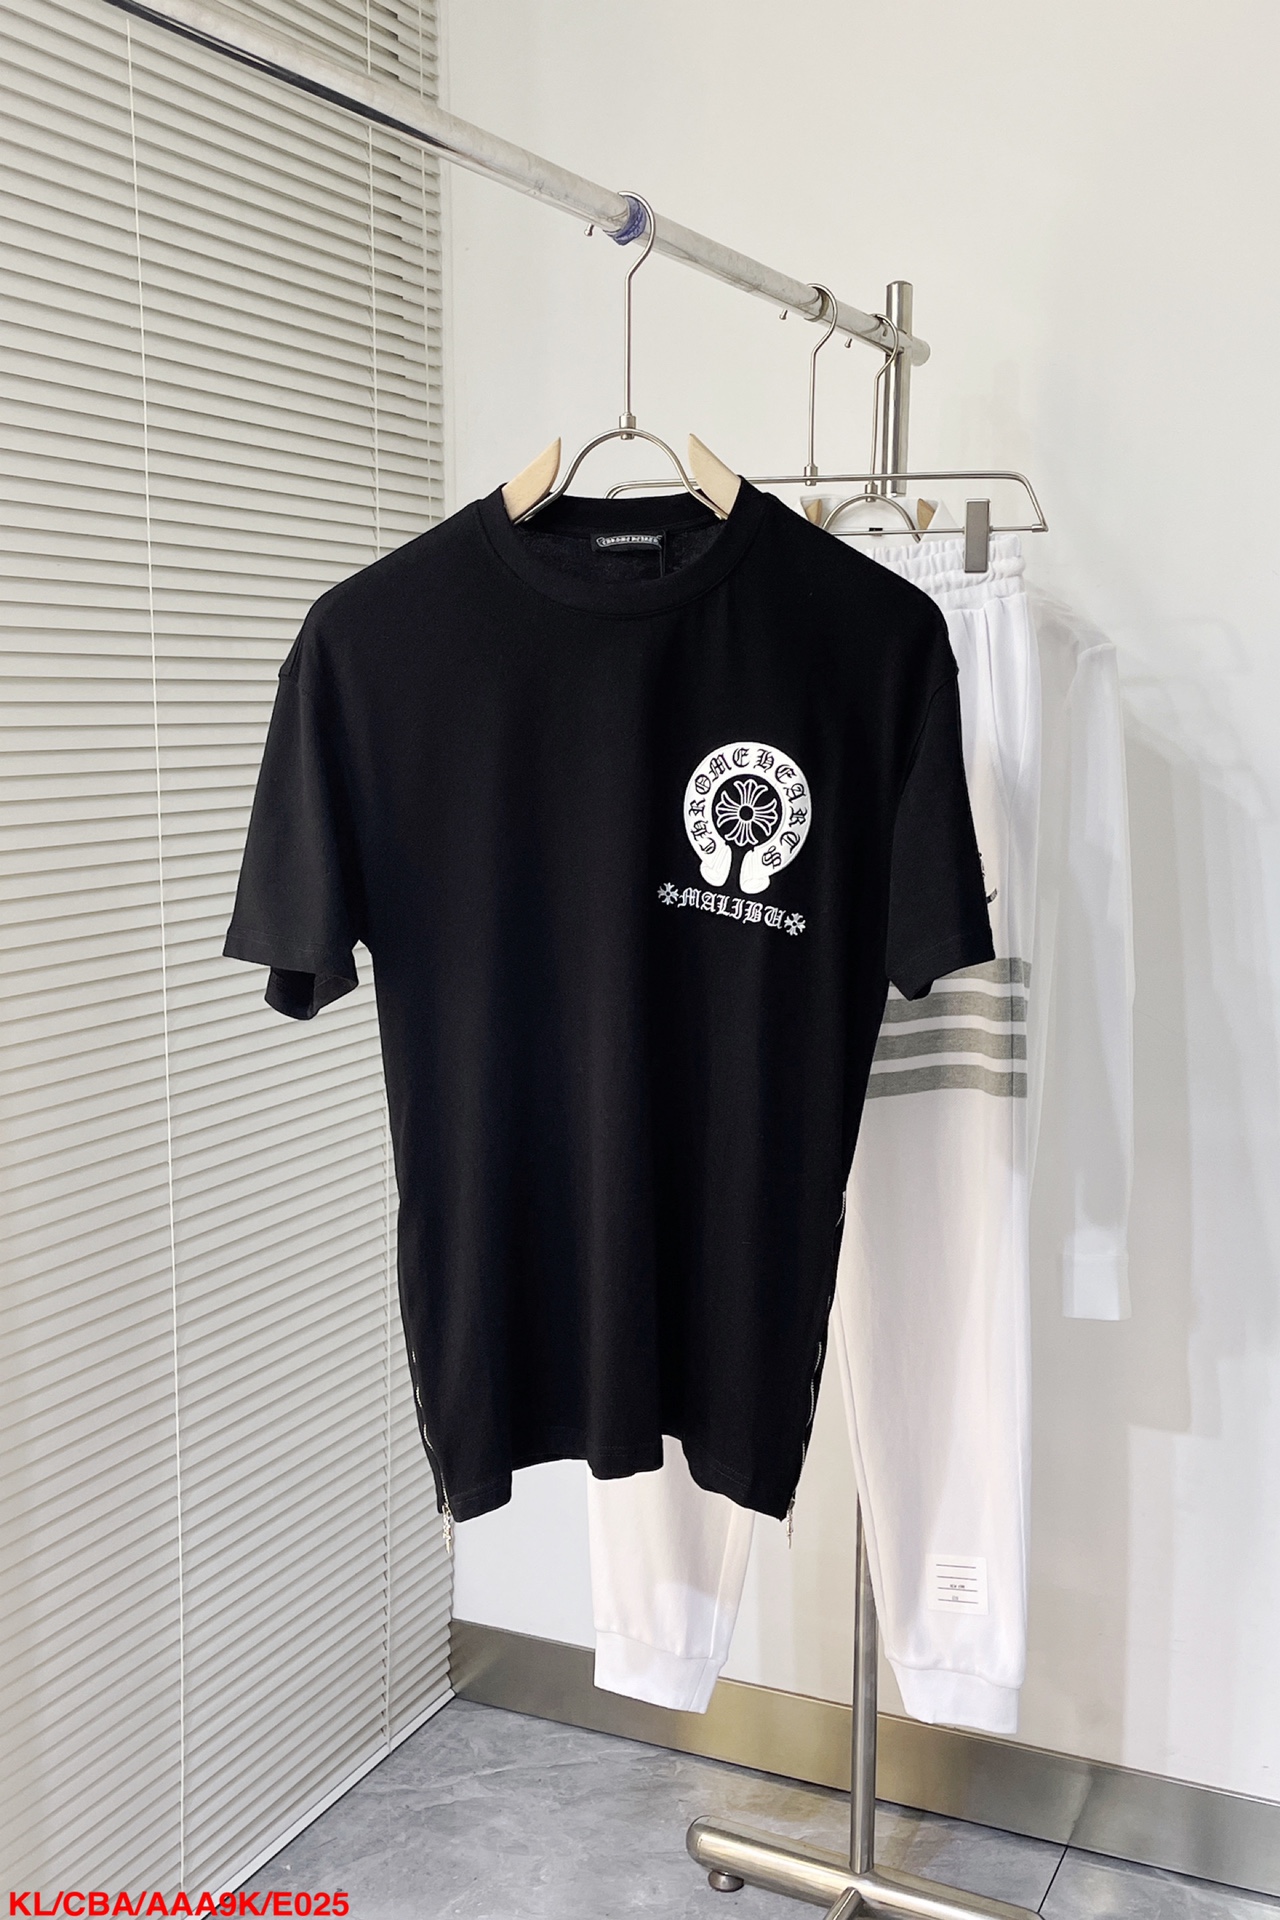 Chrome Hearts Clothing T-Shirt Embroidery Cotton Short Sleeve